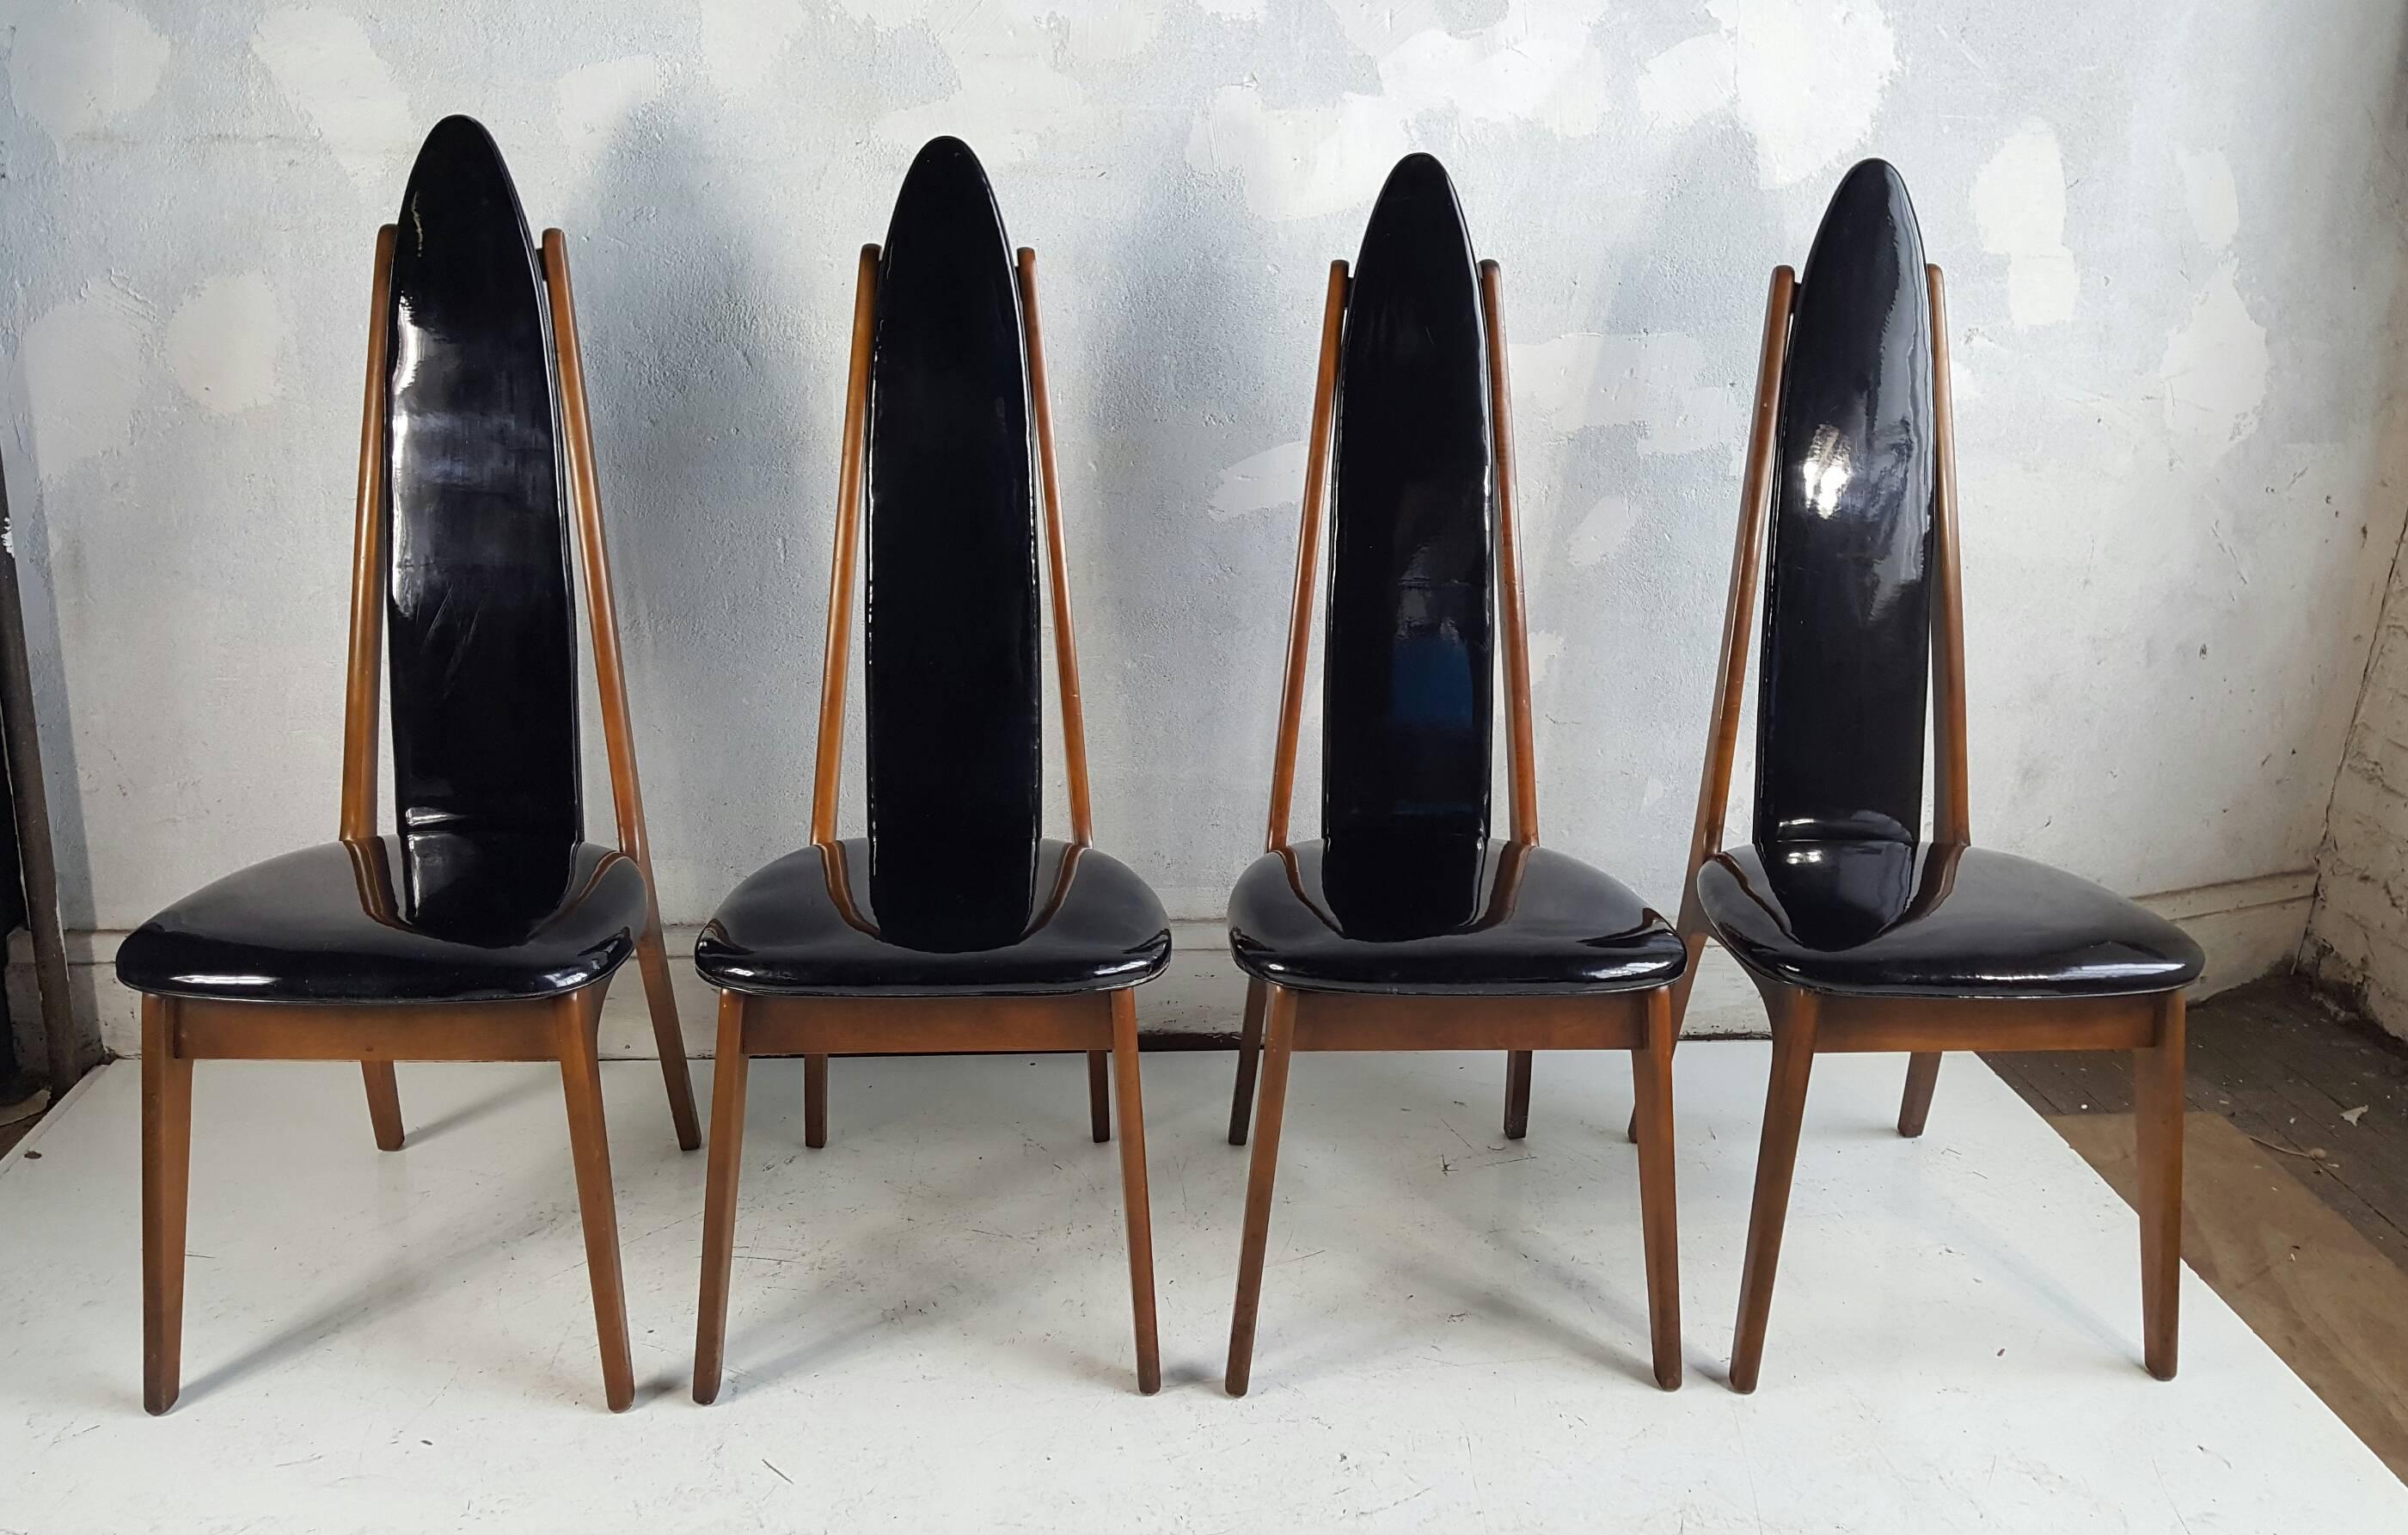 20th Century Set of Four Black Patent Leather Modernist Regency Dining Chairs